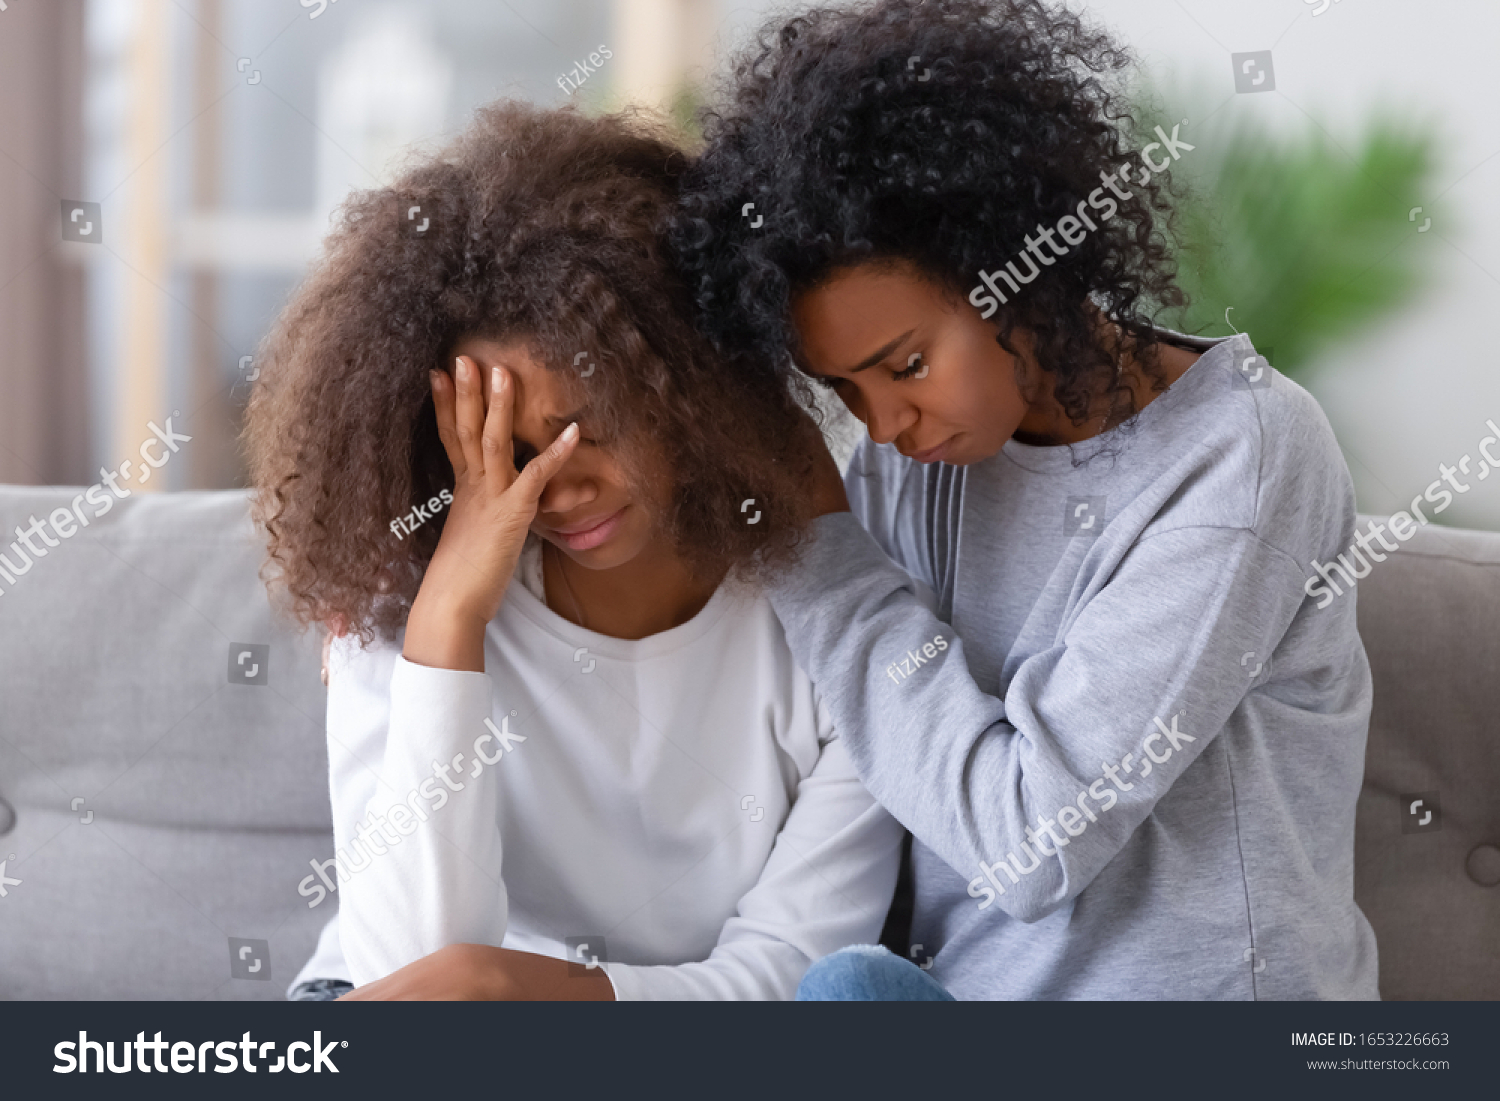 Upset african american mom sister hugging sad child teen girl consoling supporting or asking for forgiveness after fight, black mother hugging comforting depressed teenage daughter sitting on sofa #1653226663